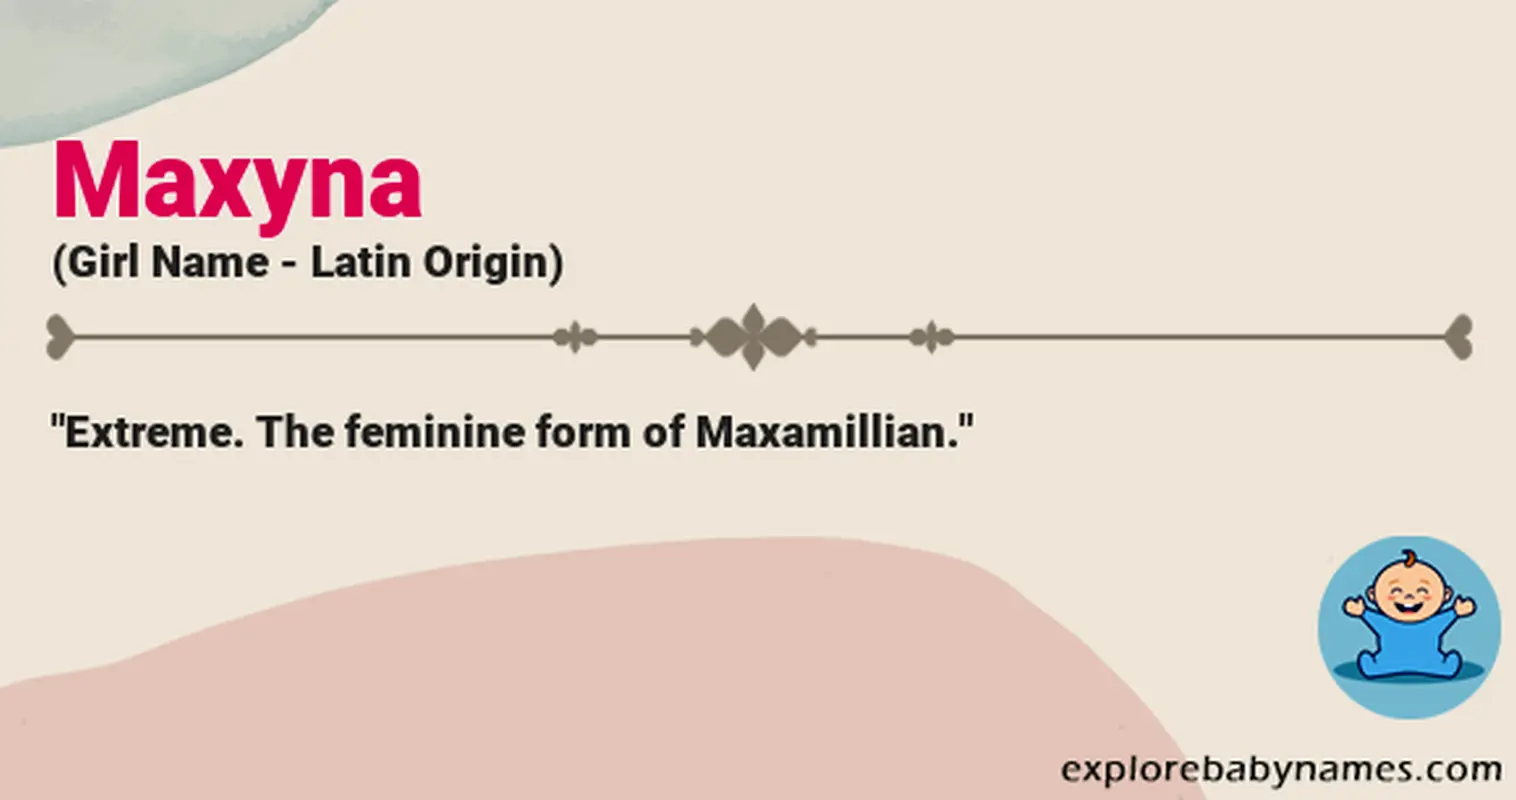 Meaning of Maxyna